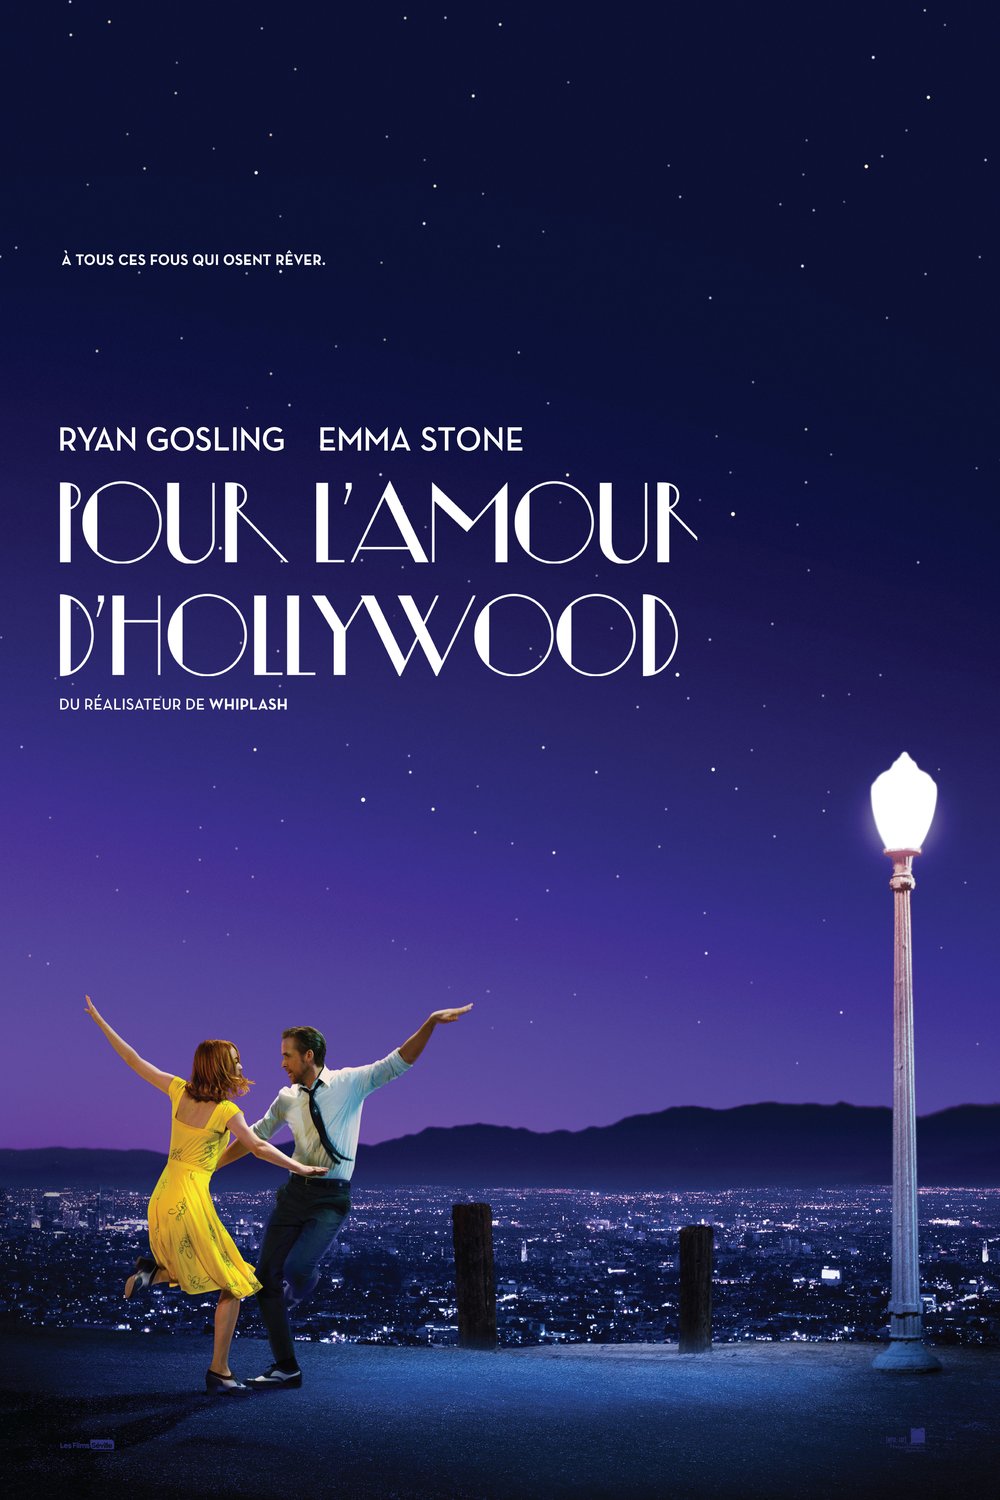 Poster of the movie Pour l'amour d'Hollywood